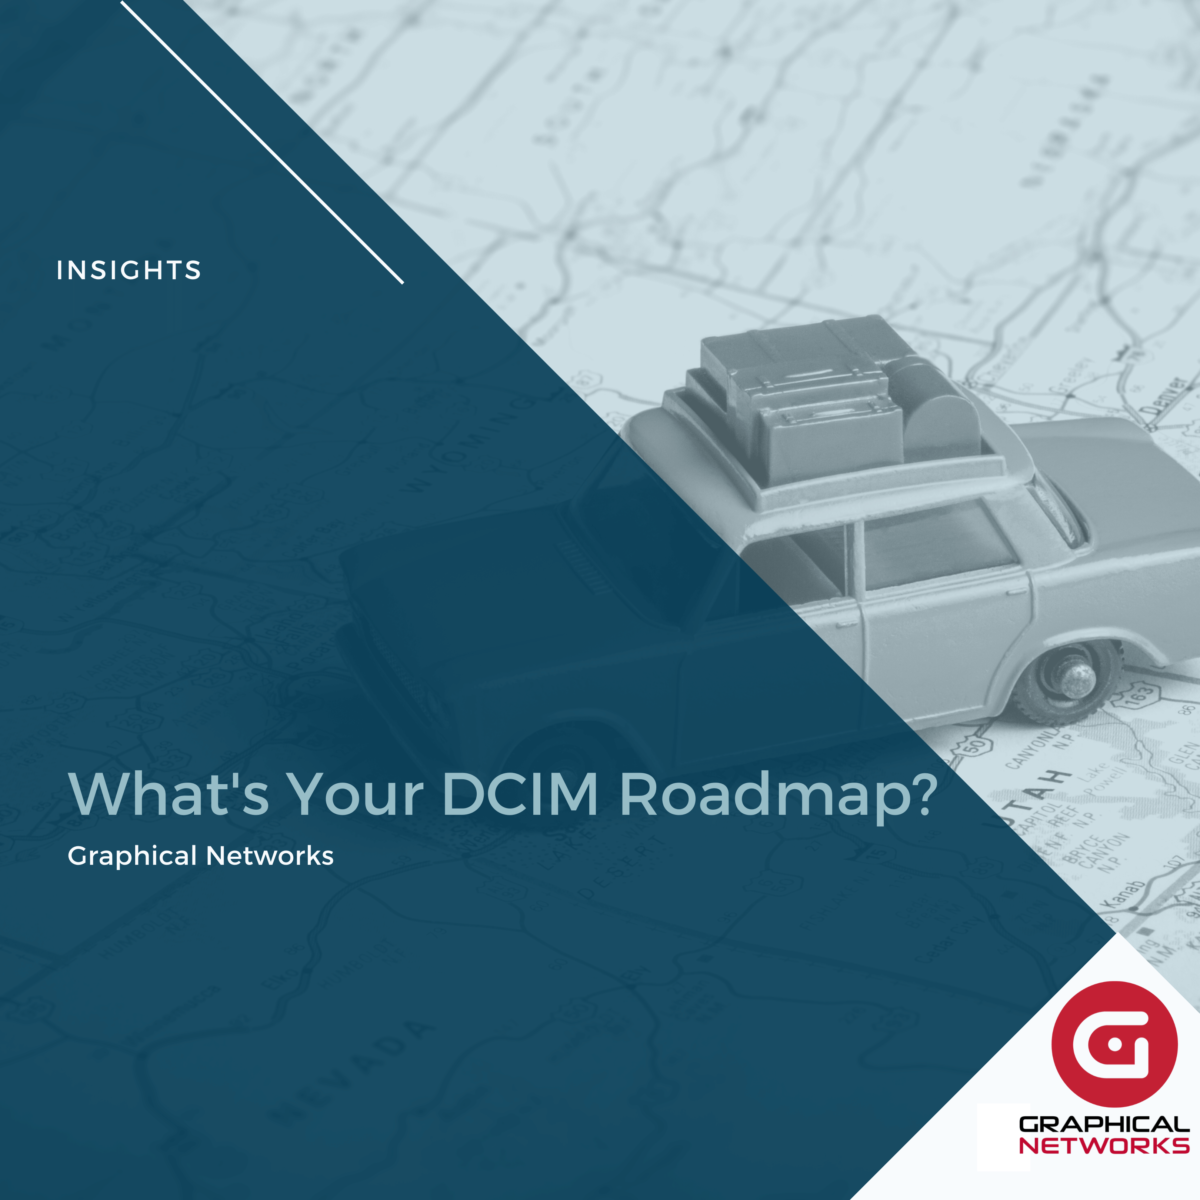 What’s Your DCIM Roadmap?